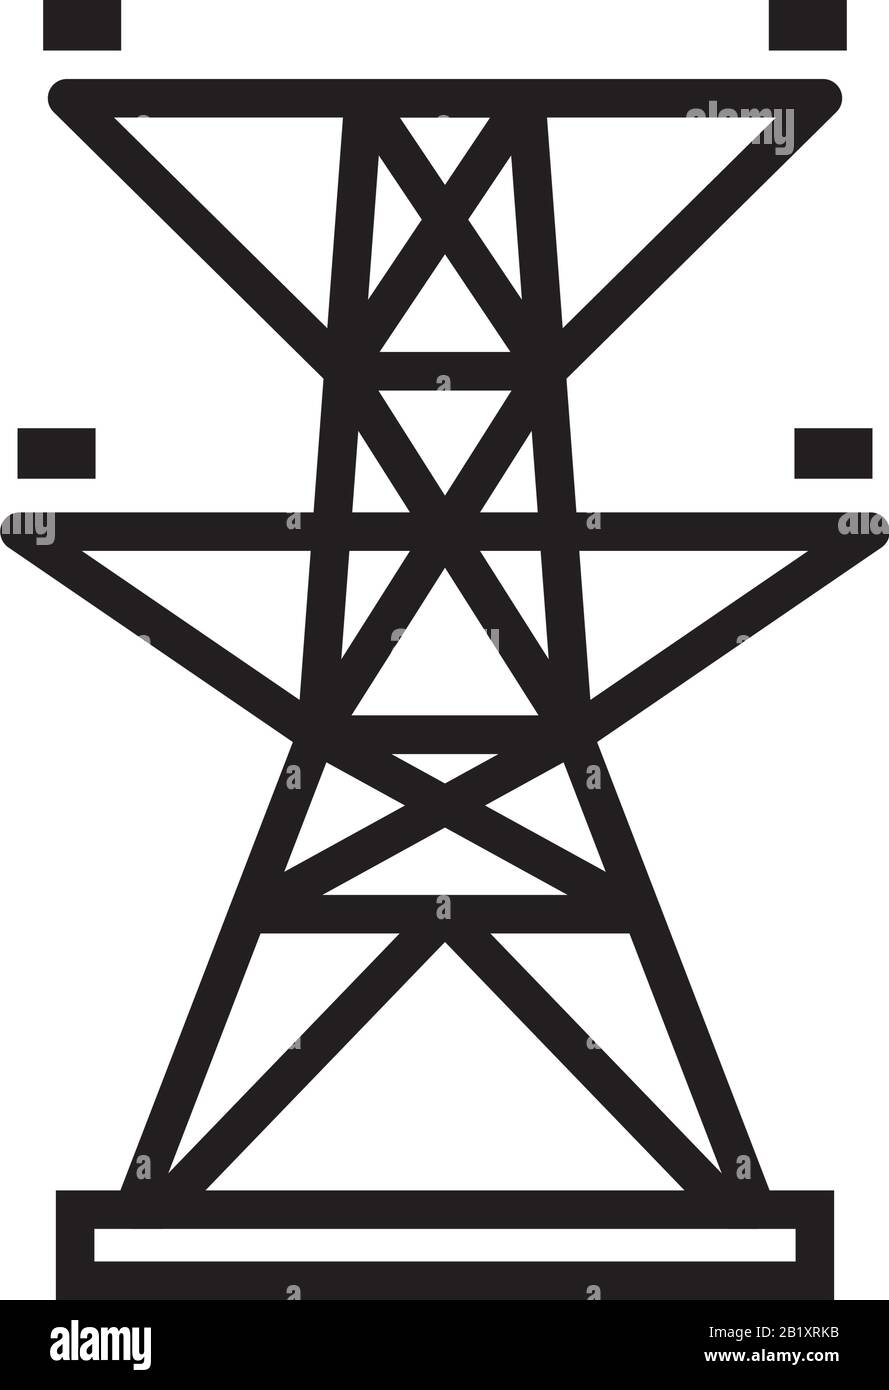 Electric tower, Overhead power line icon template black color editable. Electric tower, Overhead power line icon symbol Flat vector illustration for g Stock Vector